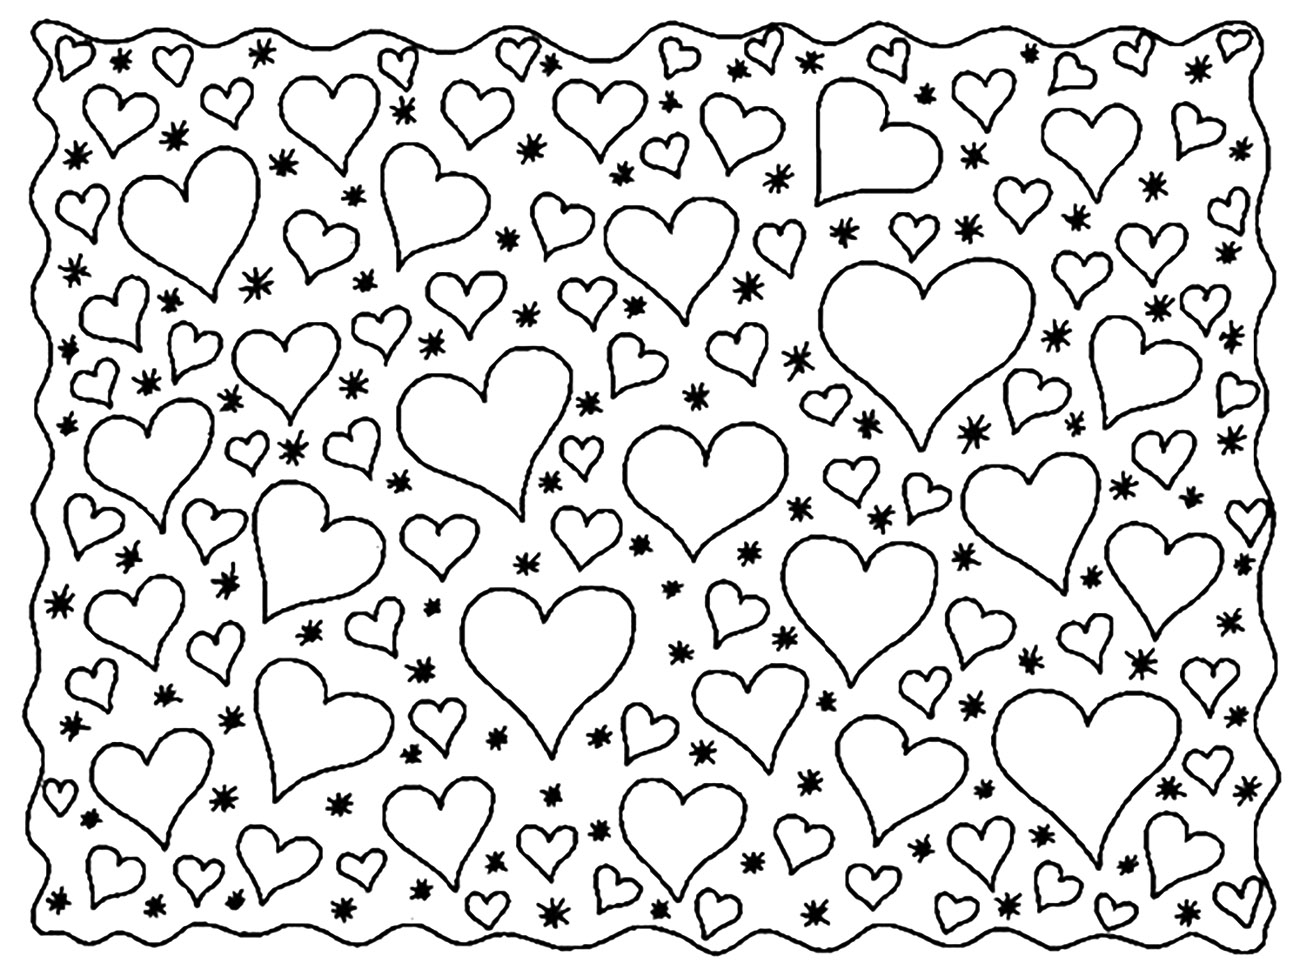 Pretty hearts to color  Anti stress Adult Coloring Pages